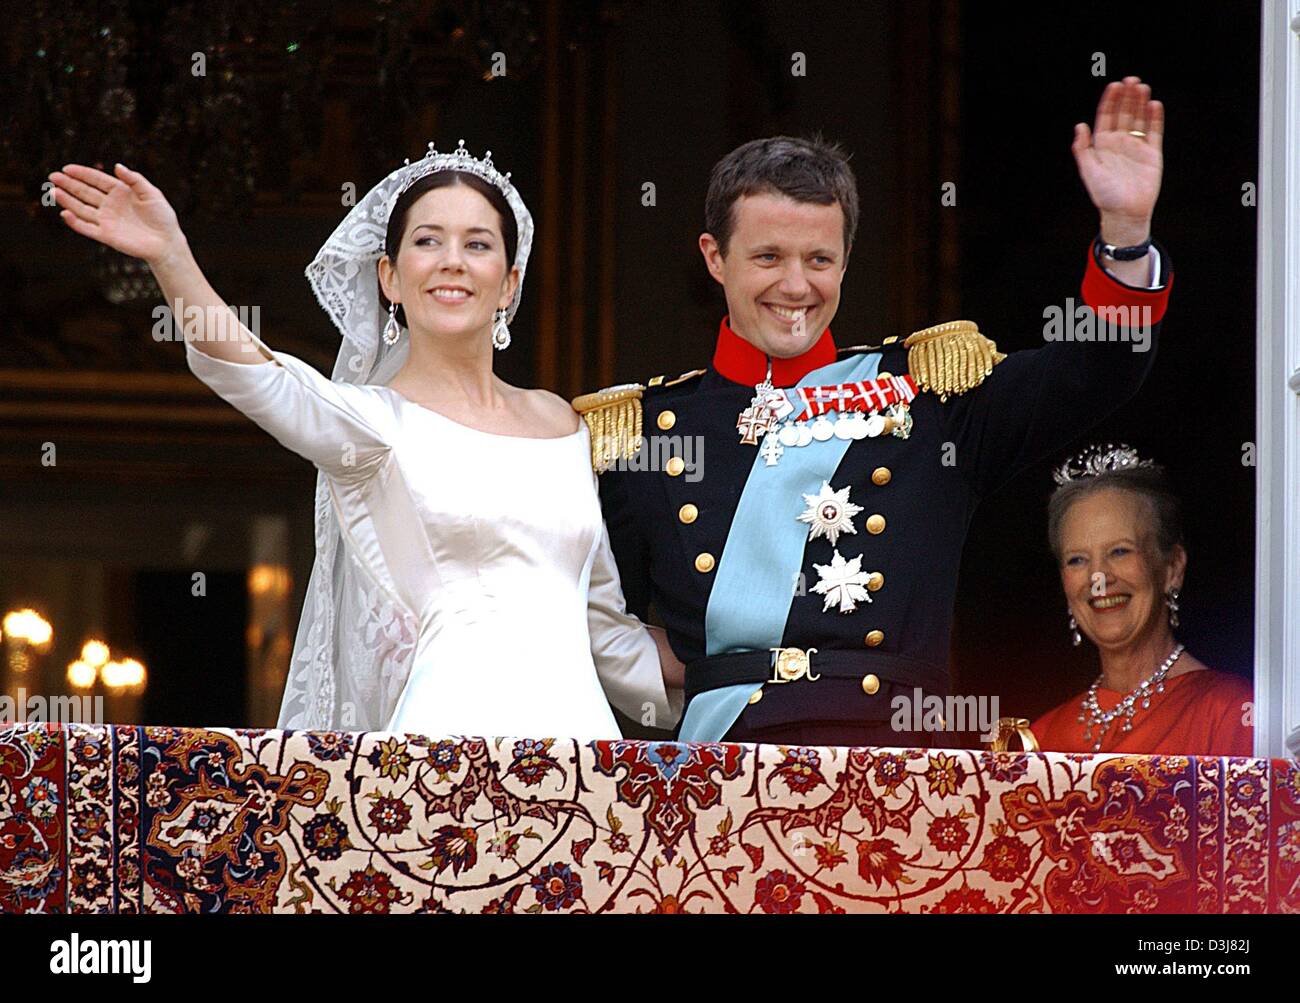 (dpa) - Danish crown prince Frederik (C) and his wife Mary Donaldson smile and wave their hands while Danish queen Margrethe (R) looks on as they stand on the balcony of Chateau Amalienborg after their wedding in Copenhagen, Denmark, Friday, 14 May 2004. The church wedding of crown prince Frederik and Mary Donaldson from Australia took place today. Members of all European royal dyn Stock Photo